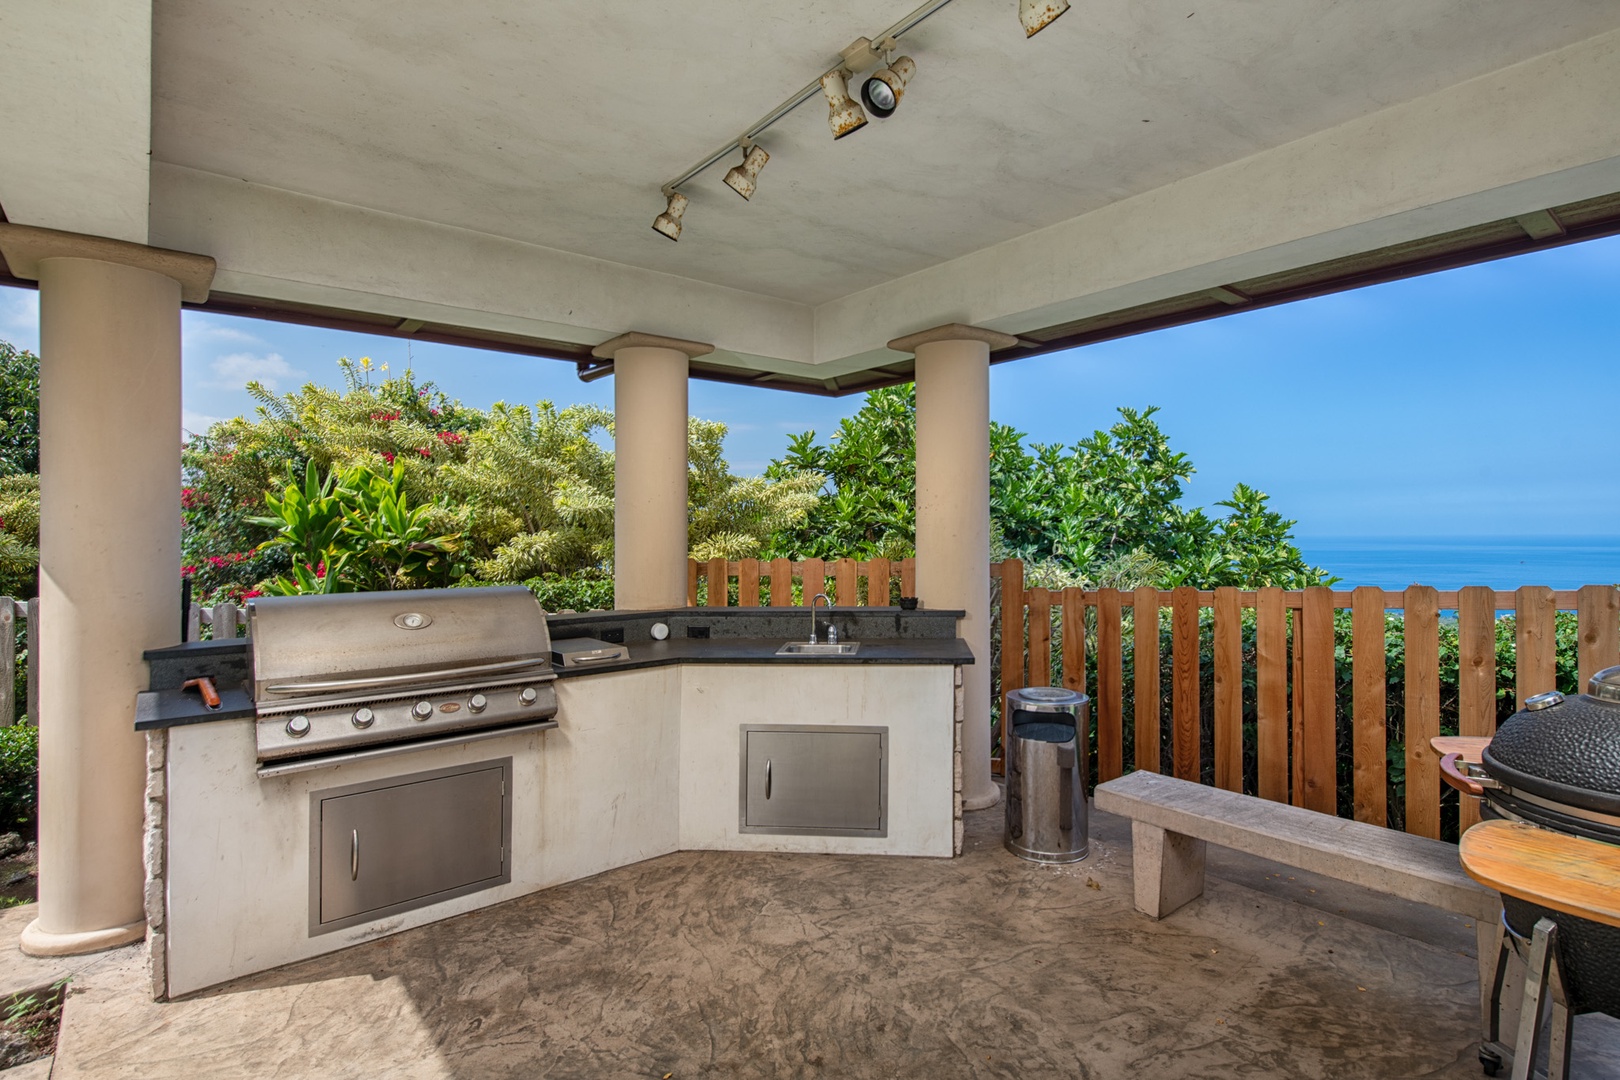 Kailua Kona Vacation Rentals, Kailua Kona Estate** - Gas grilling station with ample space to prep your meals